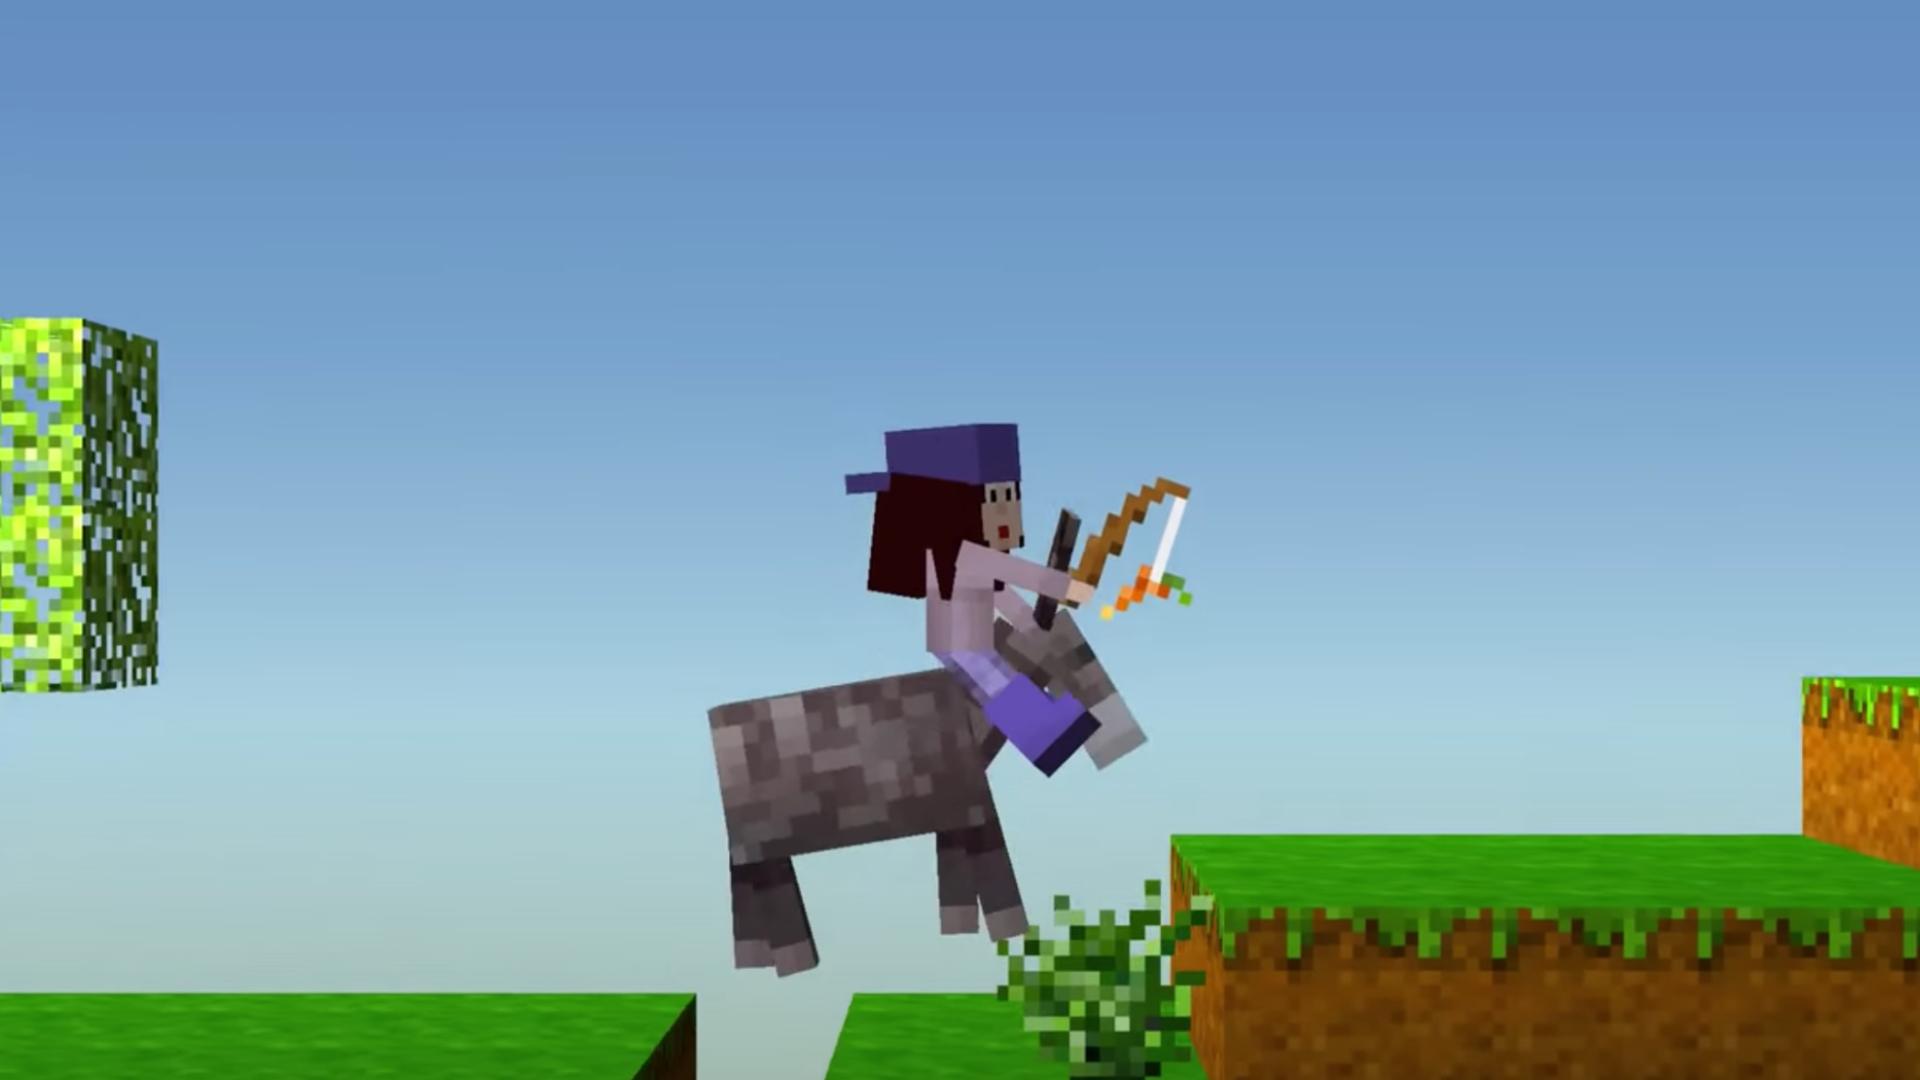 A screenshot from The Blockheads, a game like Roblox, showing a character riding on the neck of a donkey.